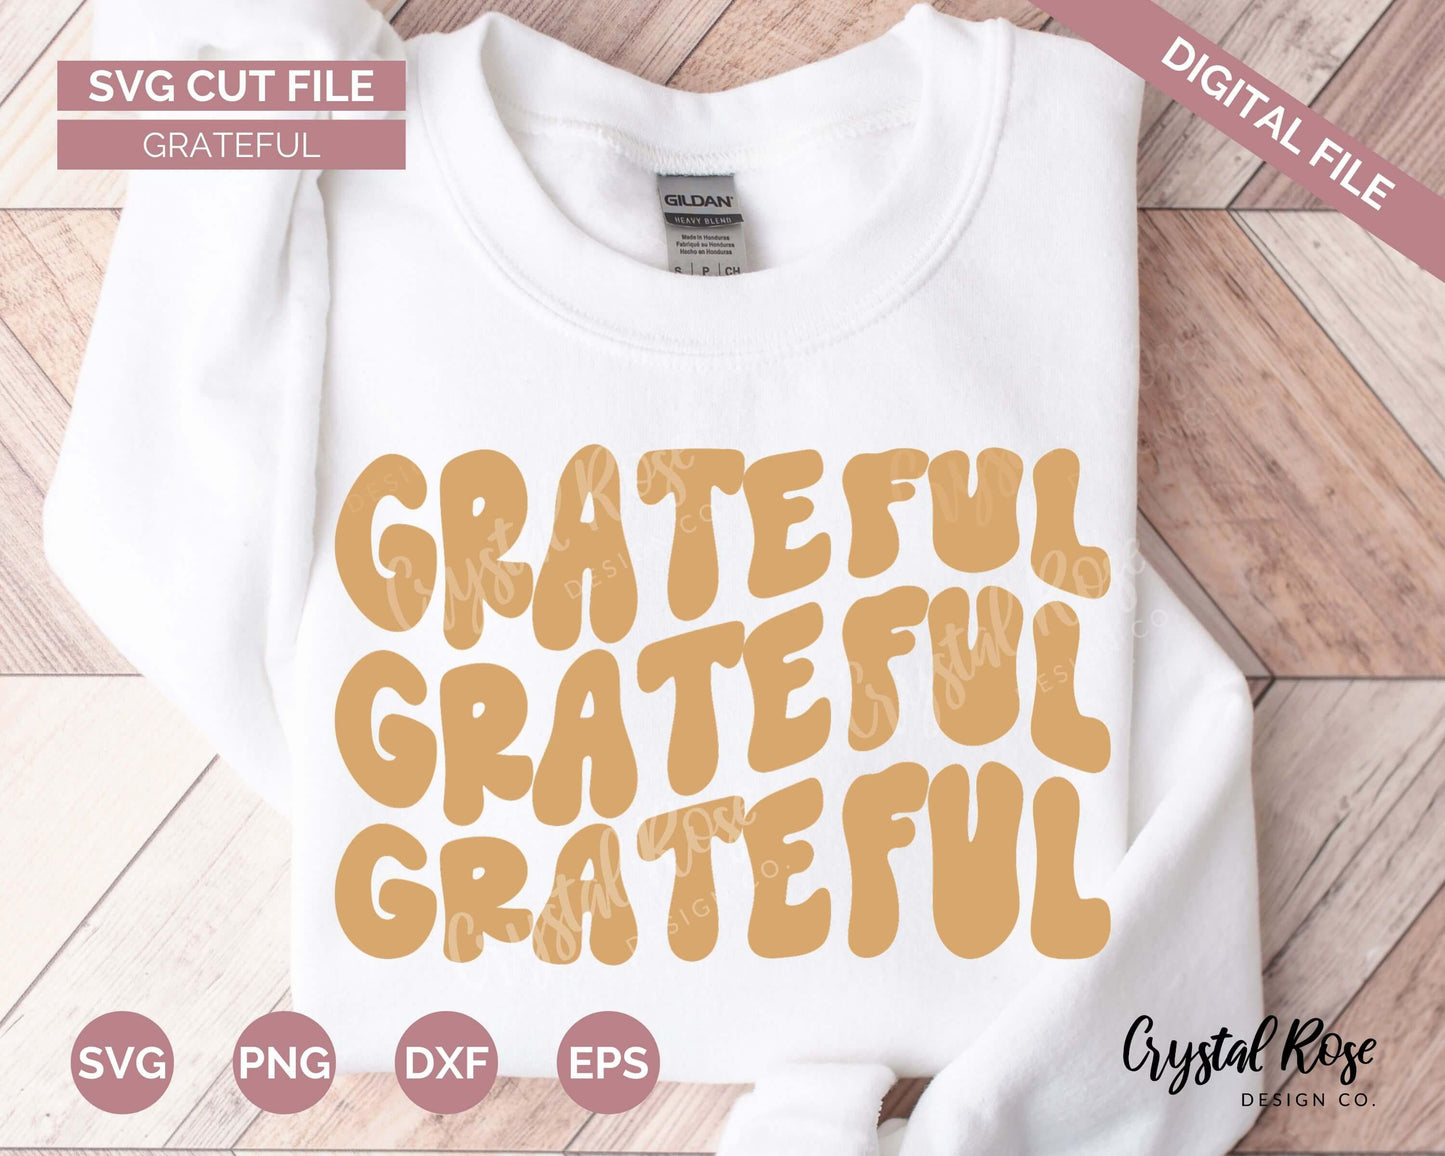 Grateful SVG, Fall SVG, Digital Download, Cricut, Silhouette, Glowforge (includes svg/png/dxf/eps)